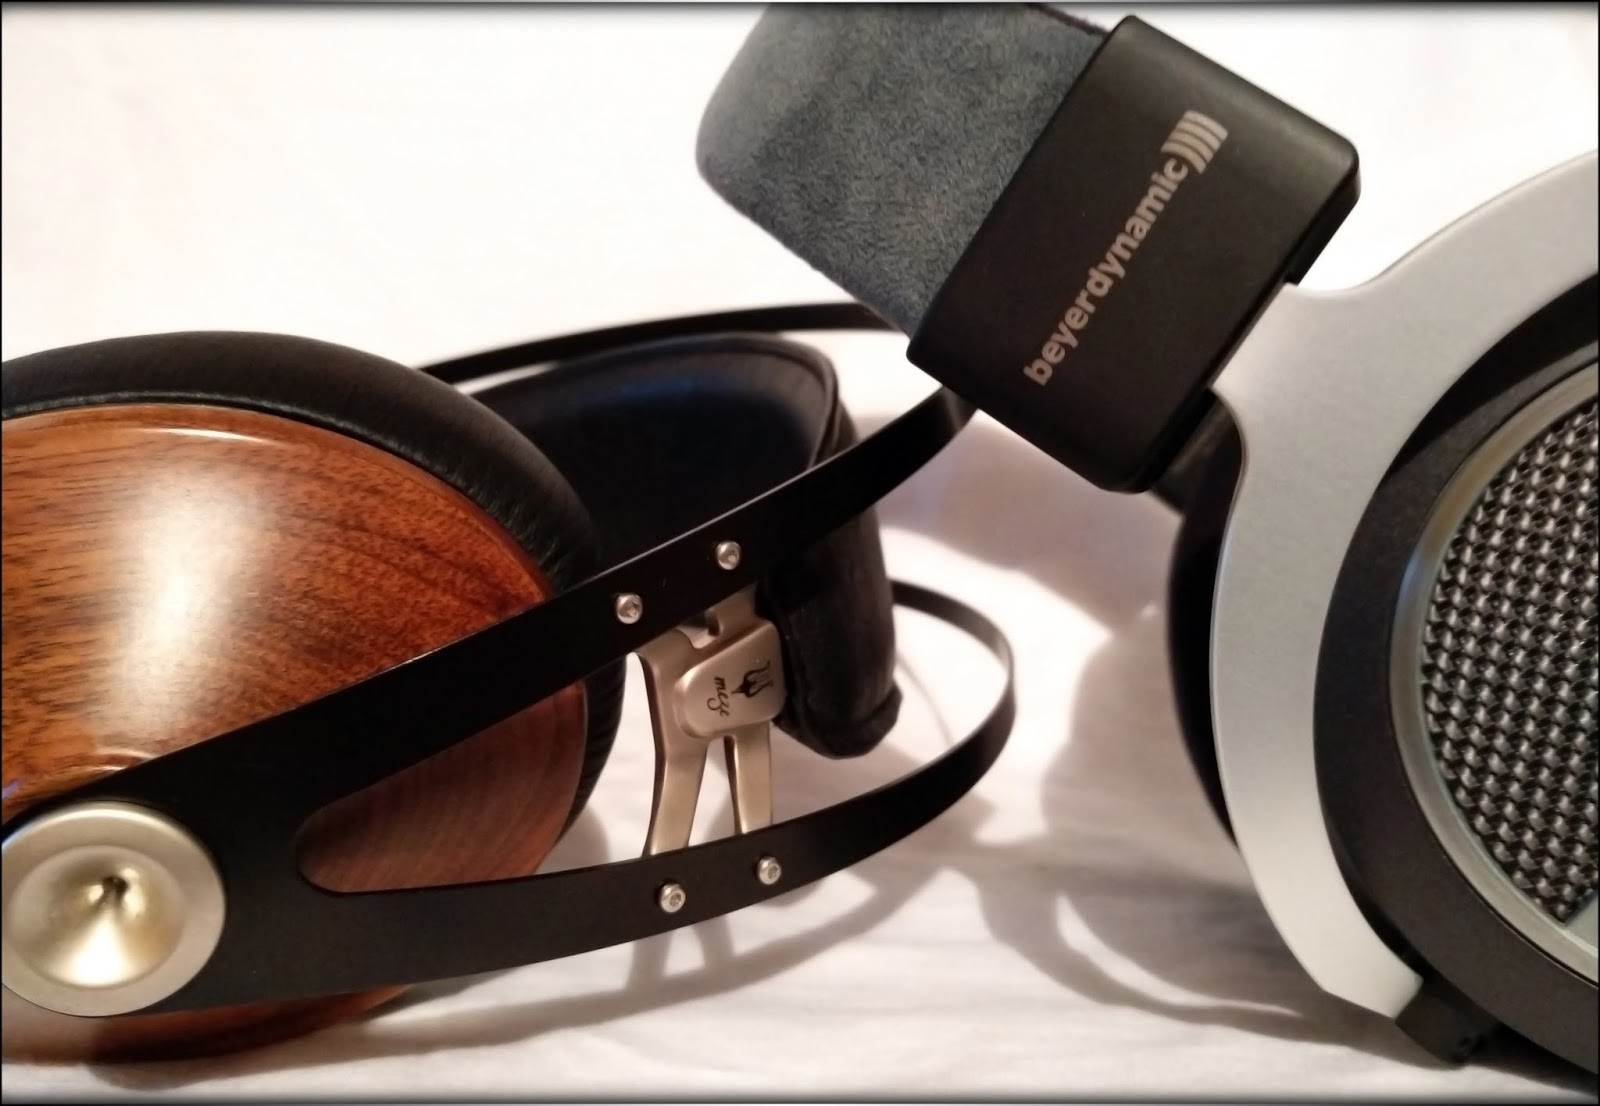 beyerdynamic Amiron home - Reviews | Headphone Reviews and Discussion